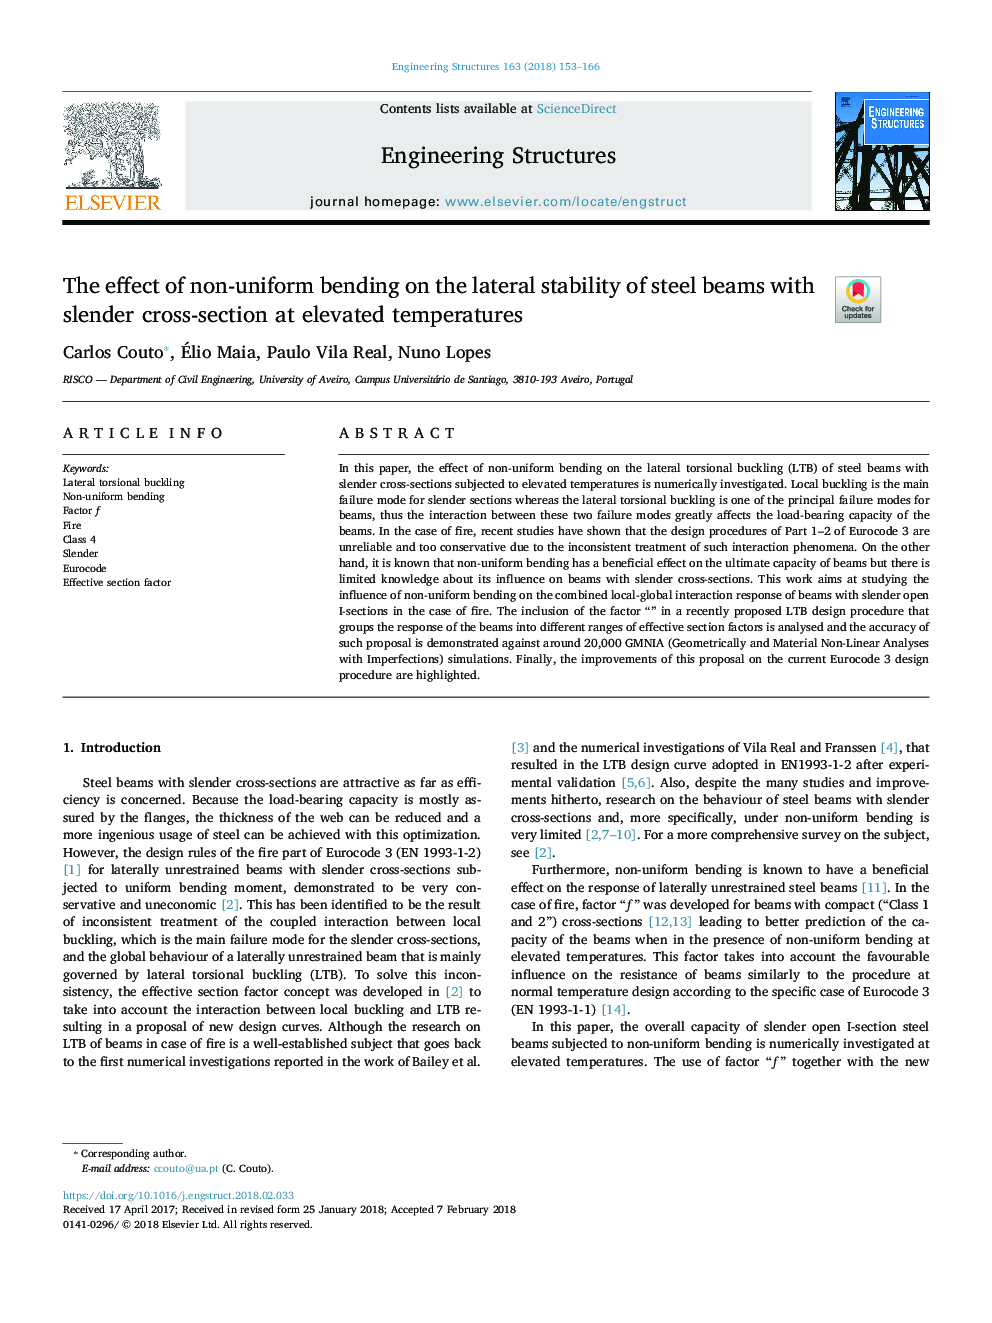 The effect of non-uniform bending on the lateral stability of steel beams with slender cross-section at elevated temperatures